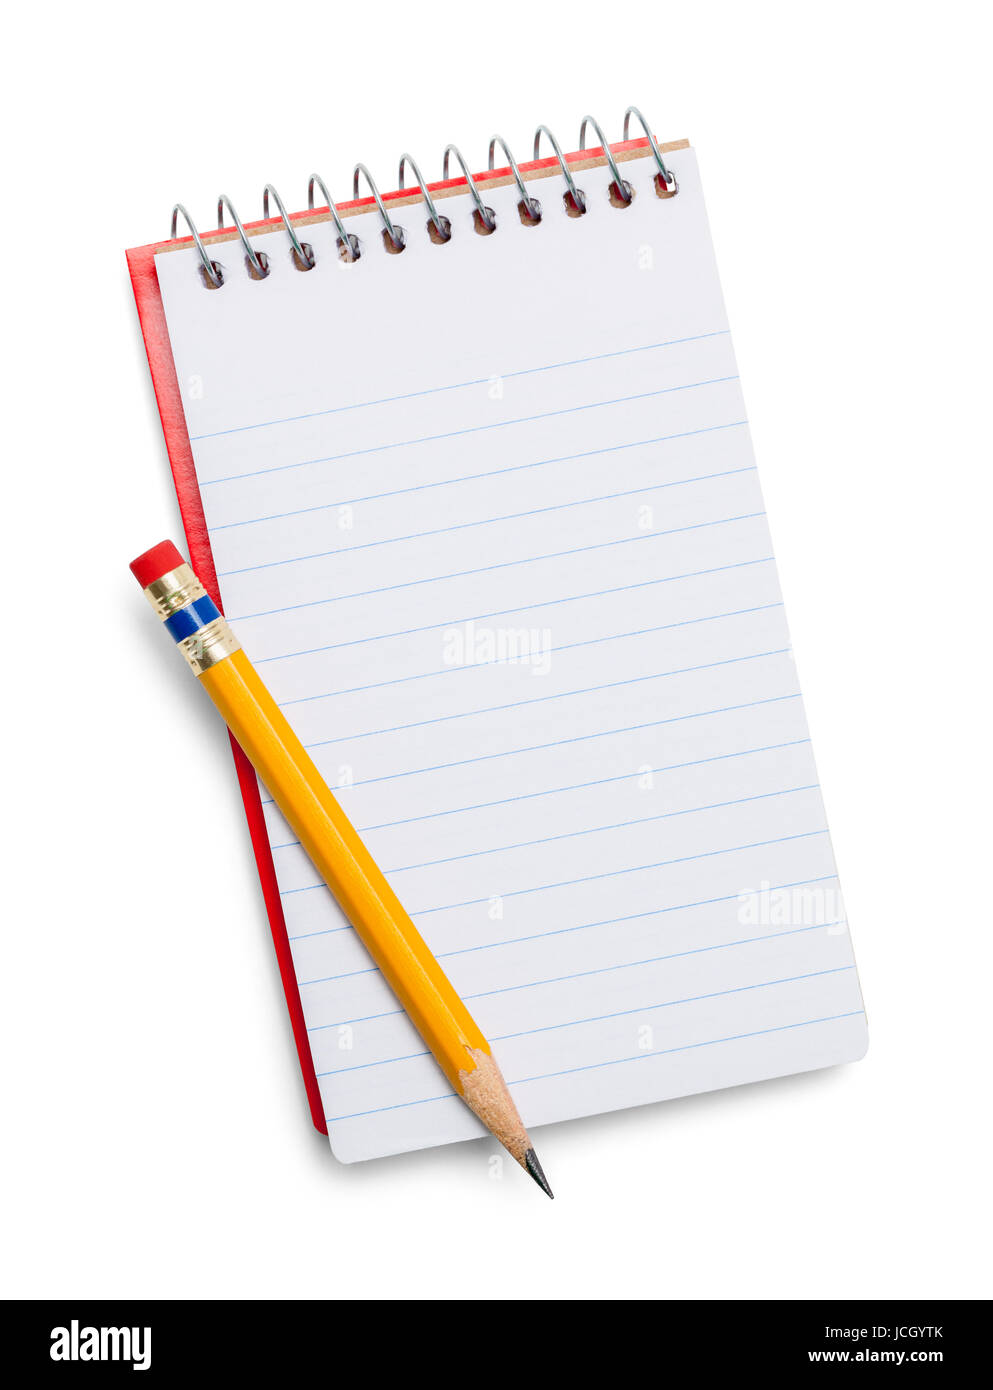 Open Notebook and Pencil Isolated on White Background. Stock Photo